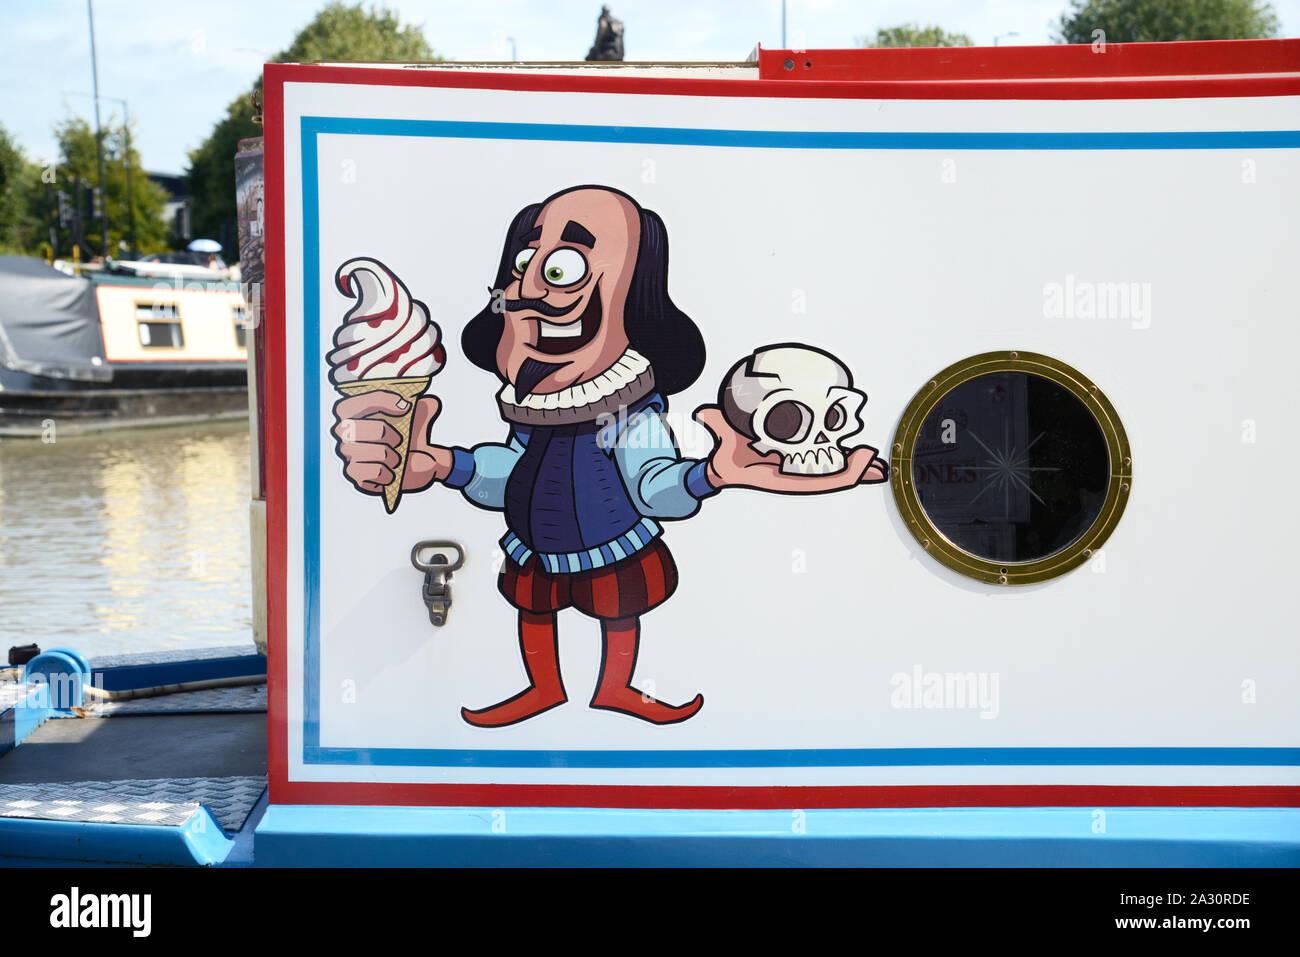 Caricature of William Shakespeare Holding Yorick's Skull, from Hamlet, & Ice Cream on Ice Cream Barge or Canal Boat Stratford-upon-Avon Stock Photo